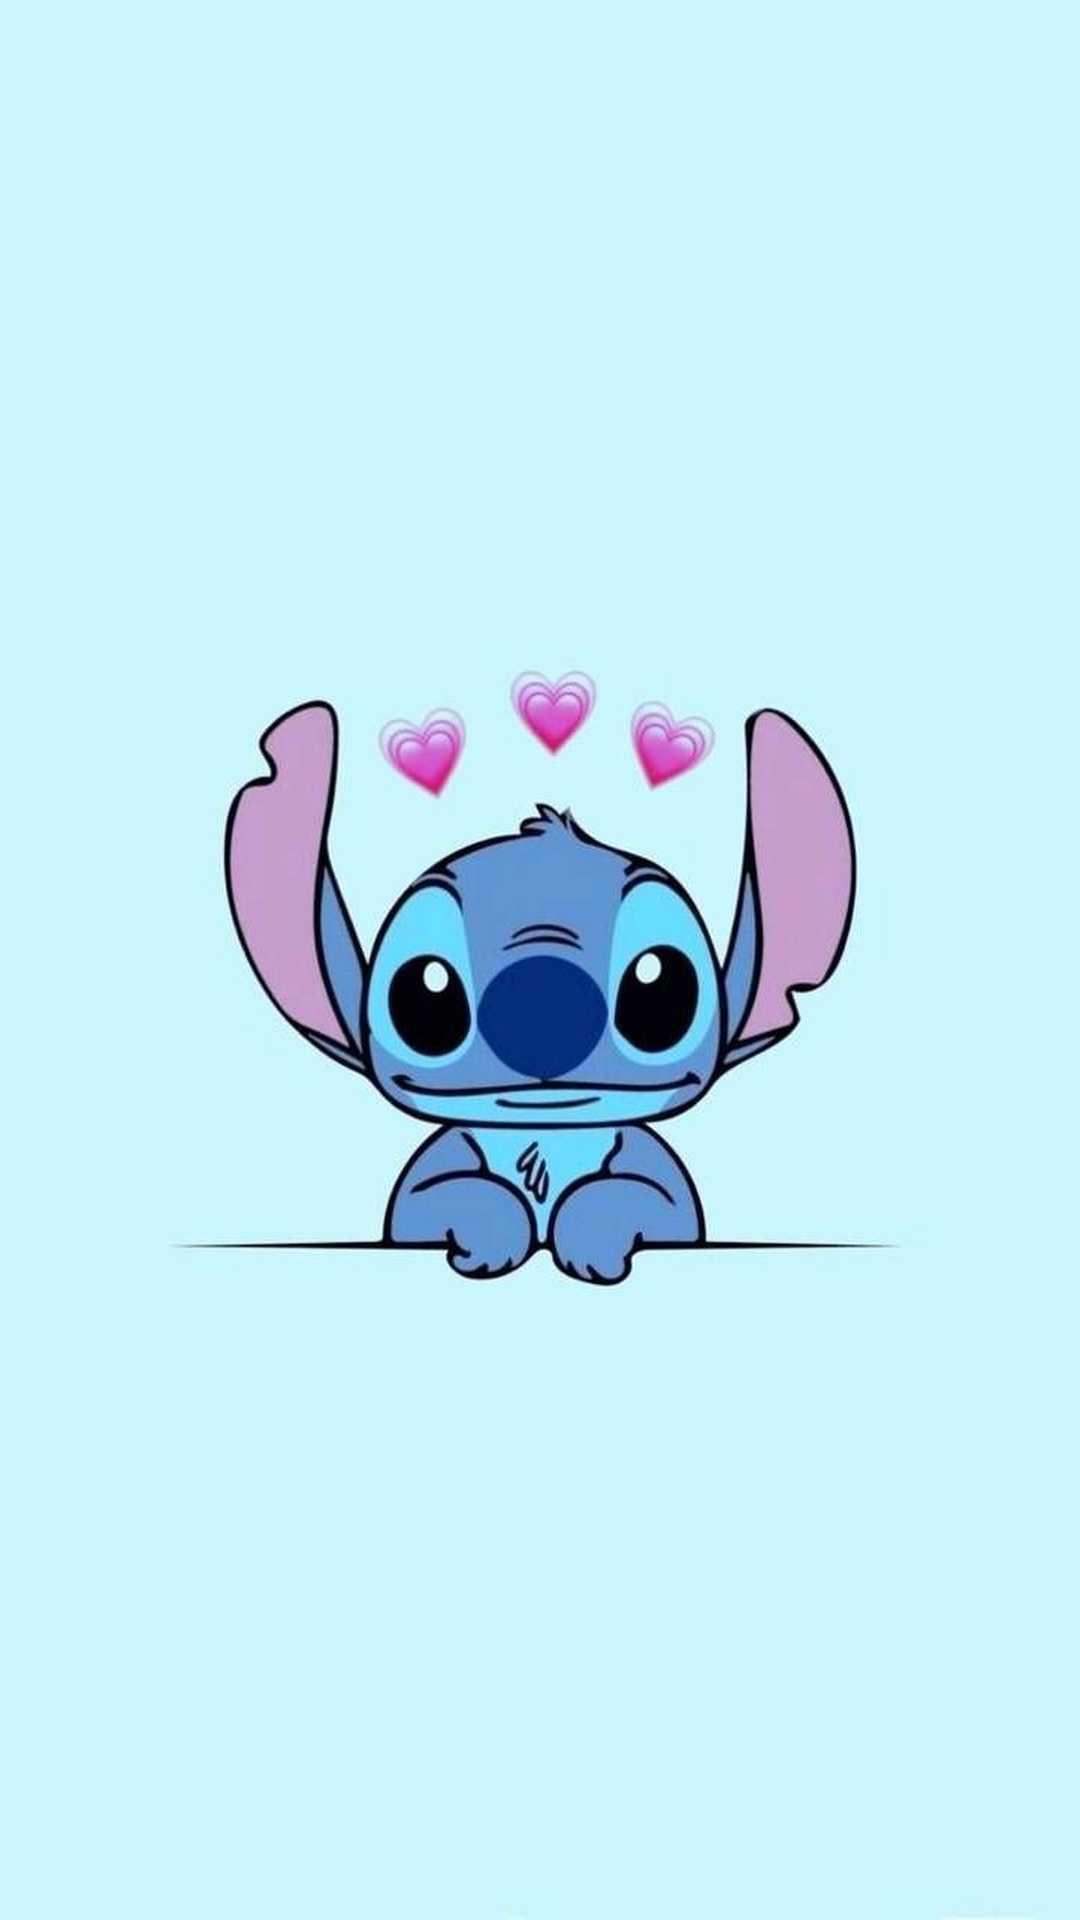 Cute Stitch iPhone Wallpaper with high-resolution 1080x1920 pixel. You can use this wallpaper for your iPhone 5, 6, 7, 8, X, XS, XR backgrounds, Mobile Screensaver, or iPad Lock Screen - Stitch